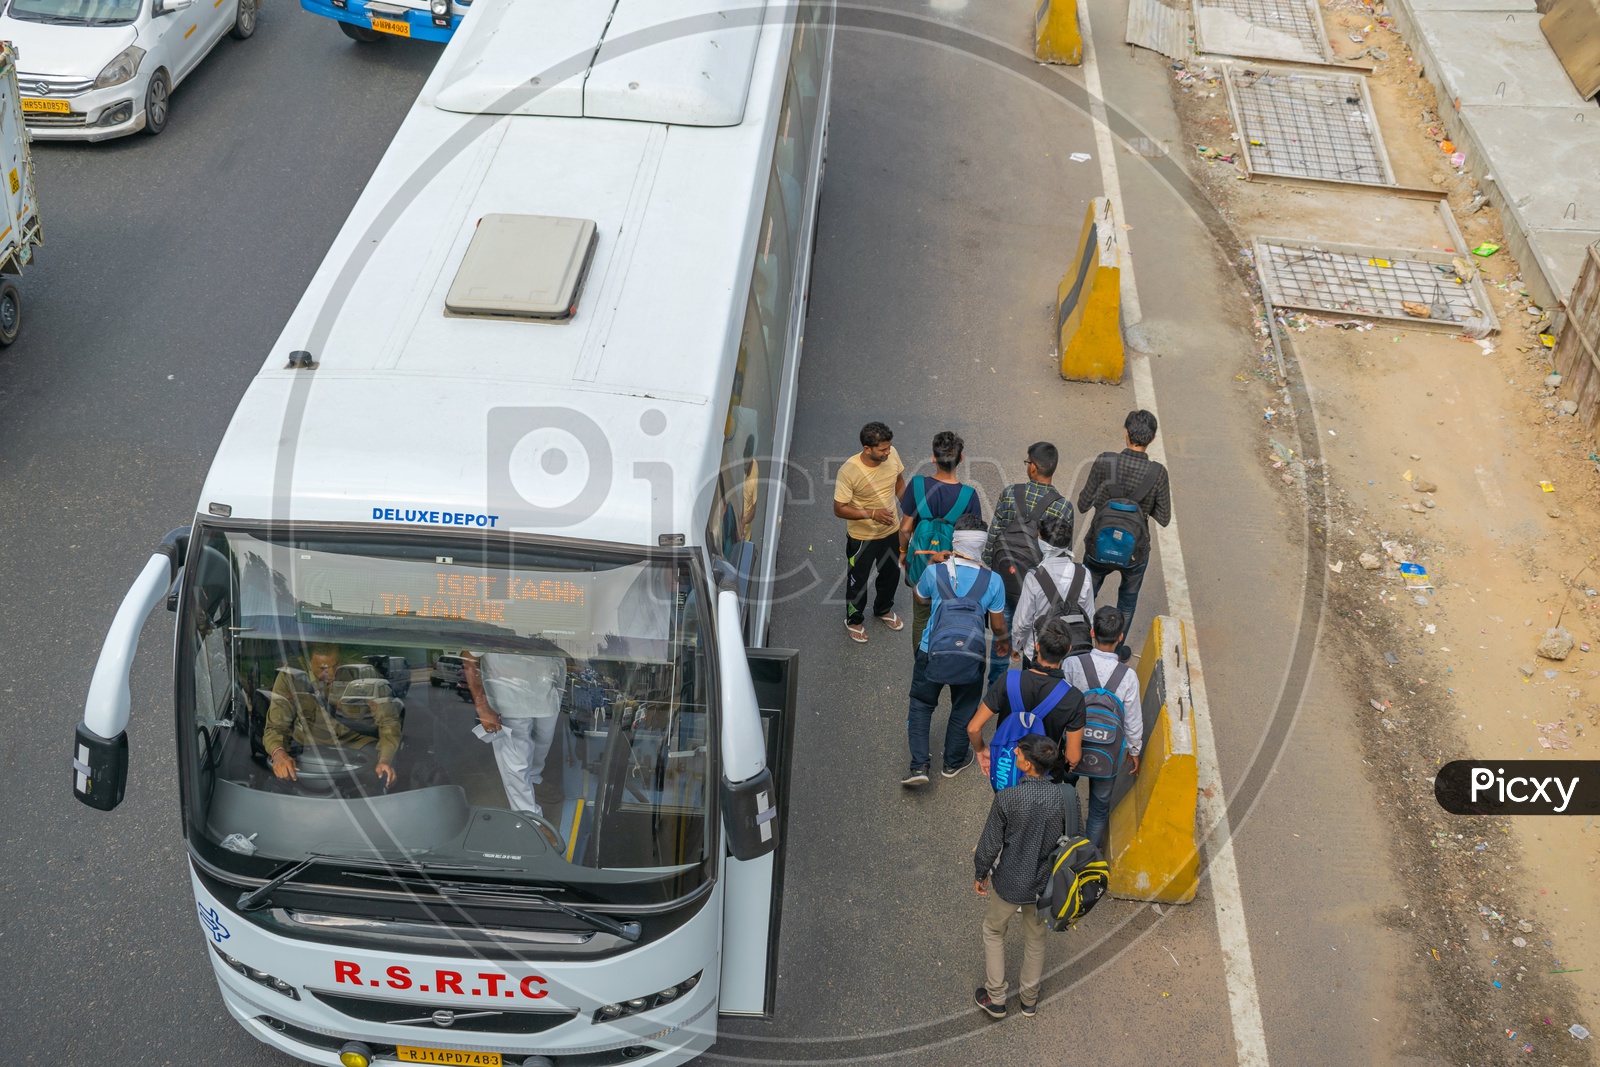 Rajasthan roadways (R.S.R.T.C) bus and passengers